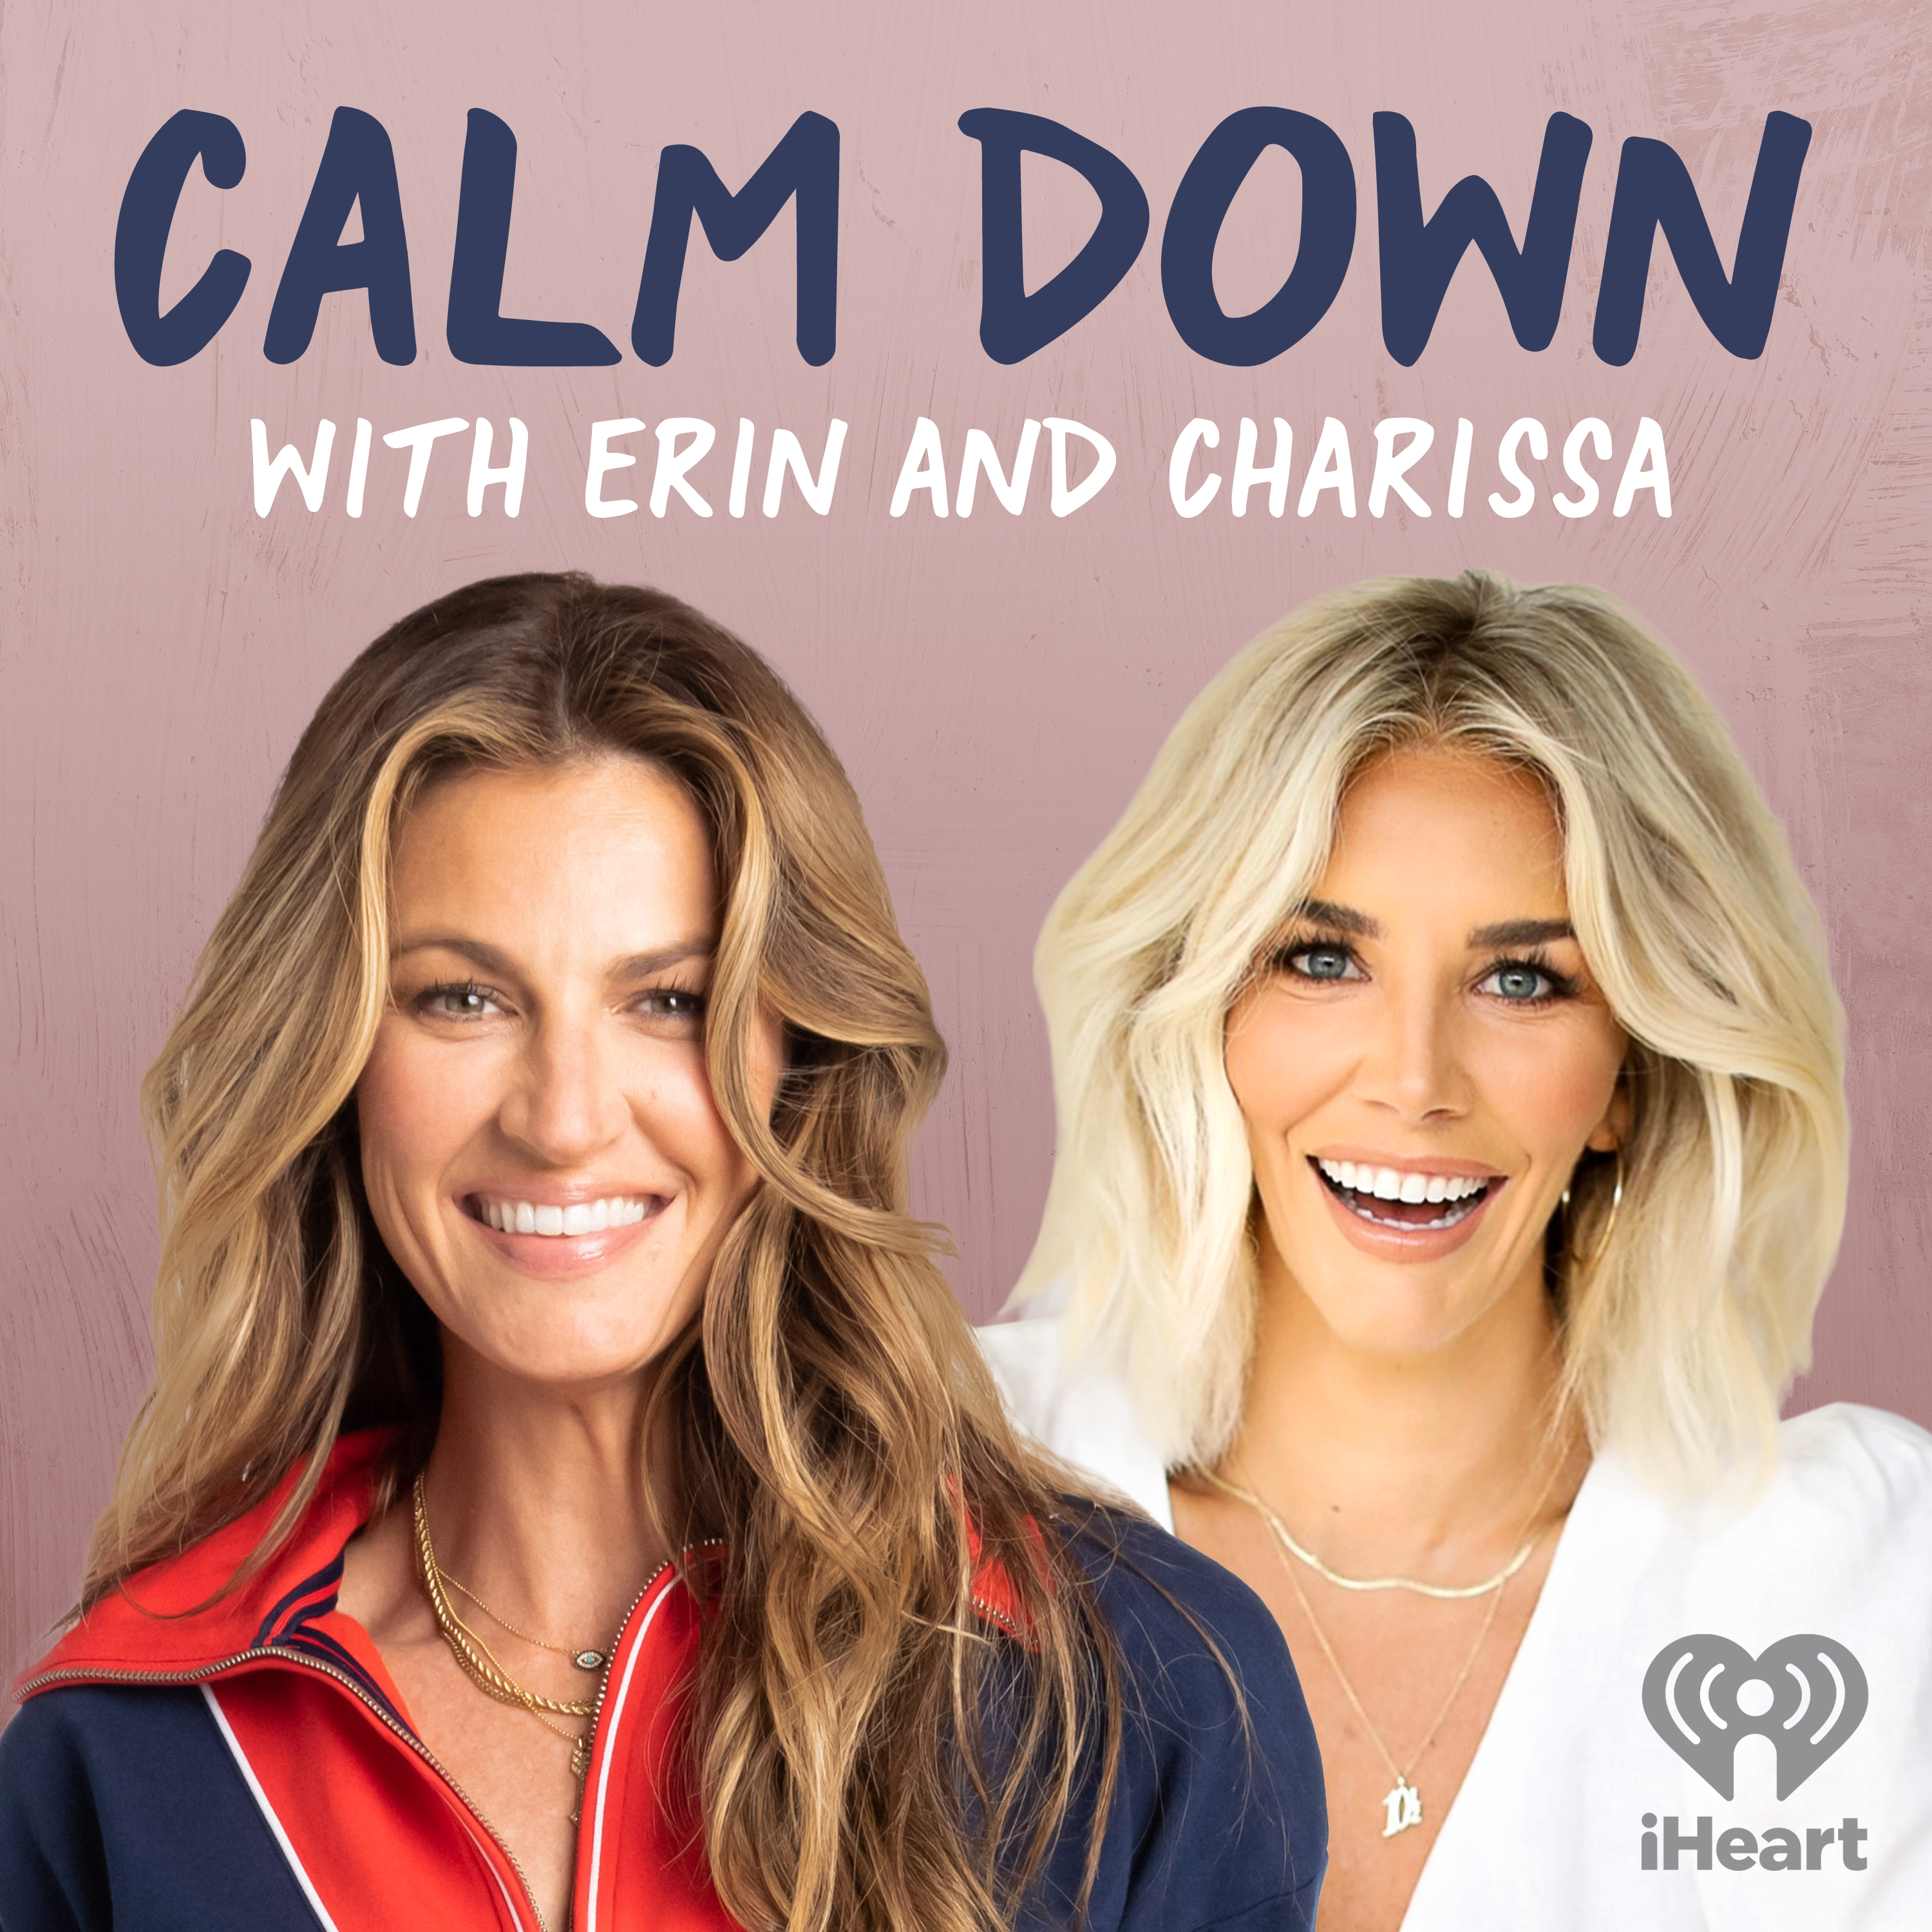 Introducing: Calm Down with Erin and Charissa